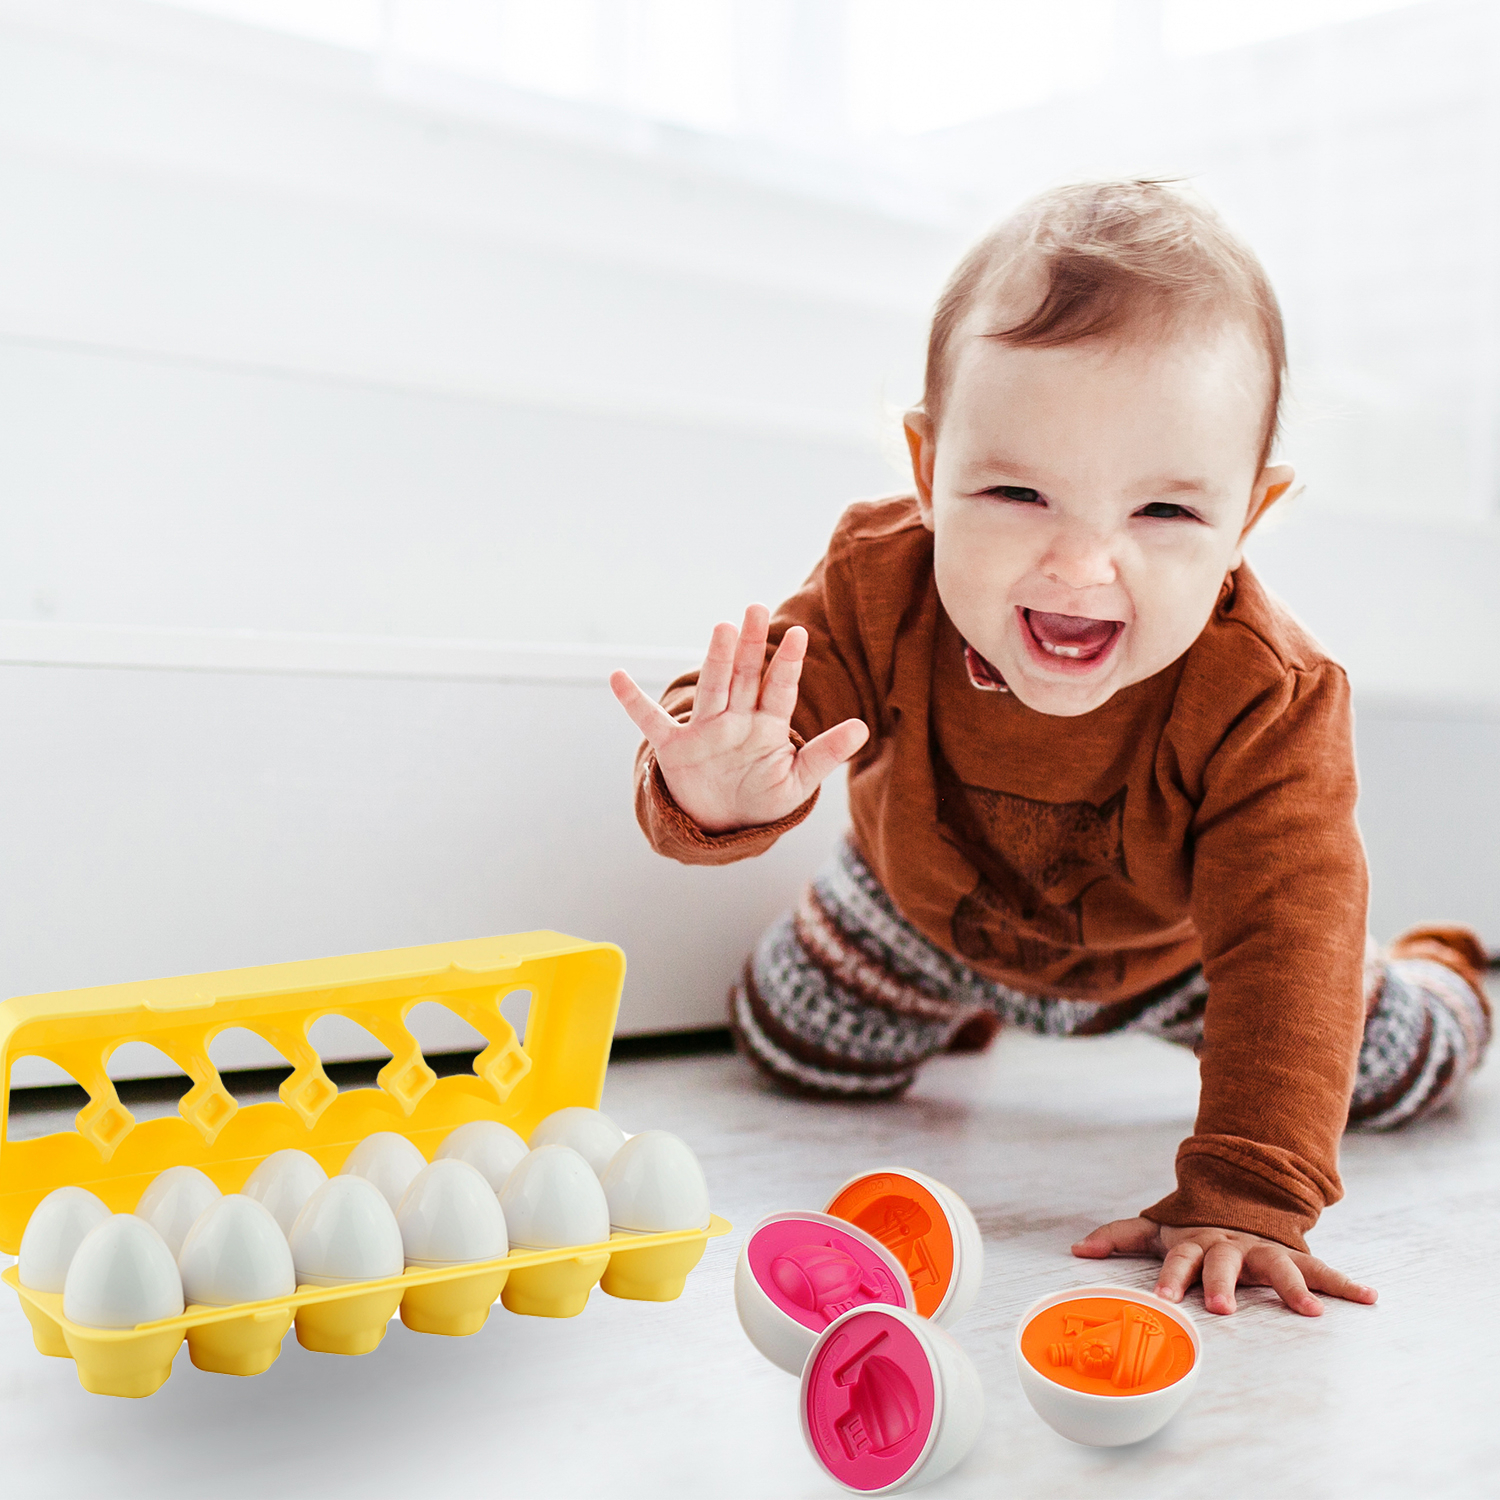 Dimple Fun Egg Matching Toy Set Of 5 (Total 60 Eggs) Toddler STEM Easter Eggs Toys -Shape, Numbers, Vegetable, Dinosaur